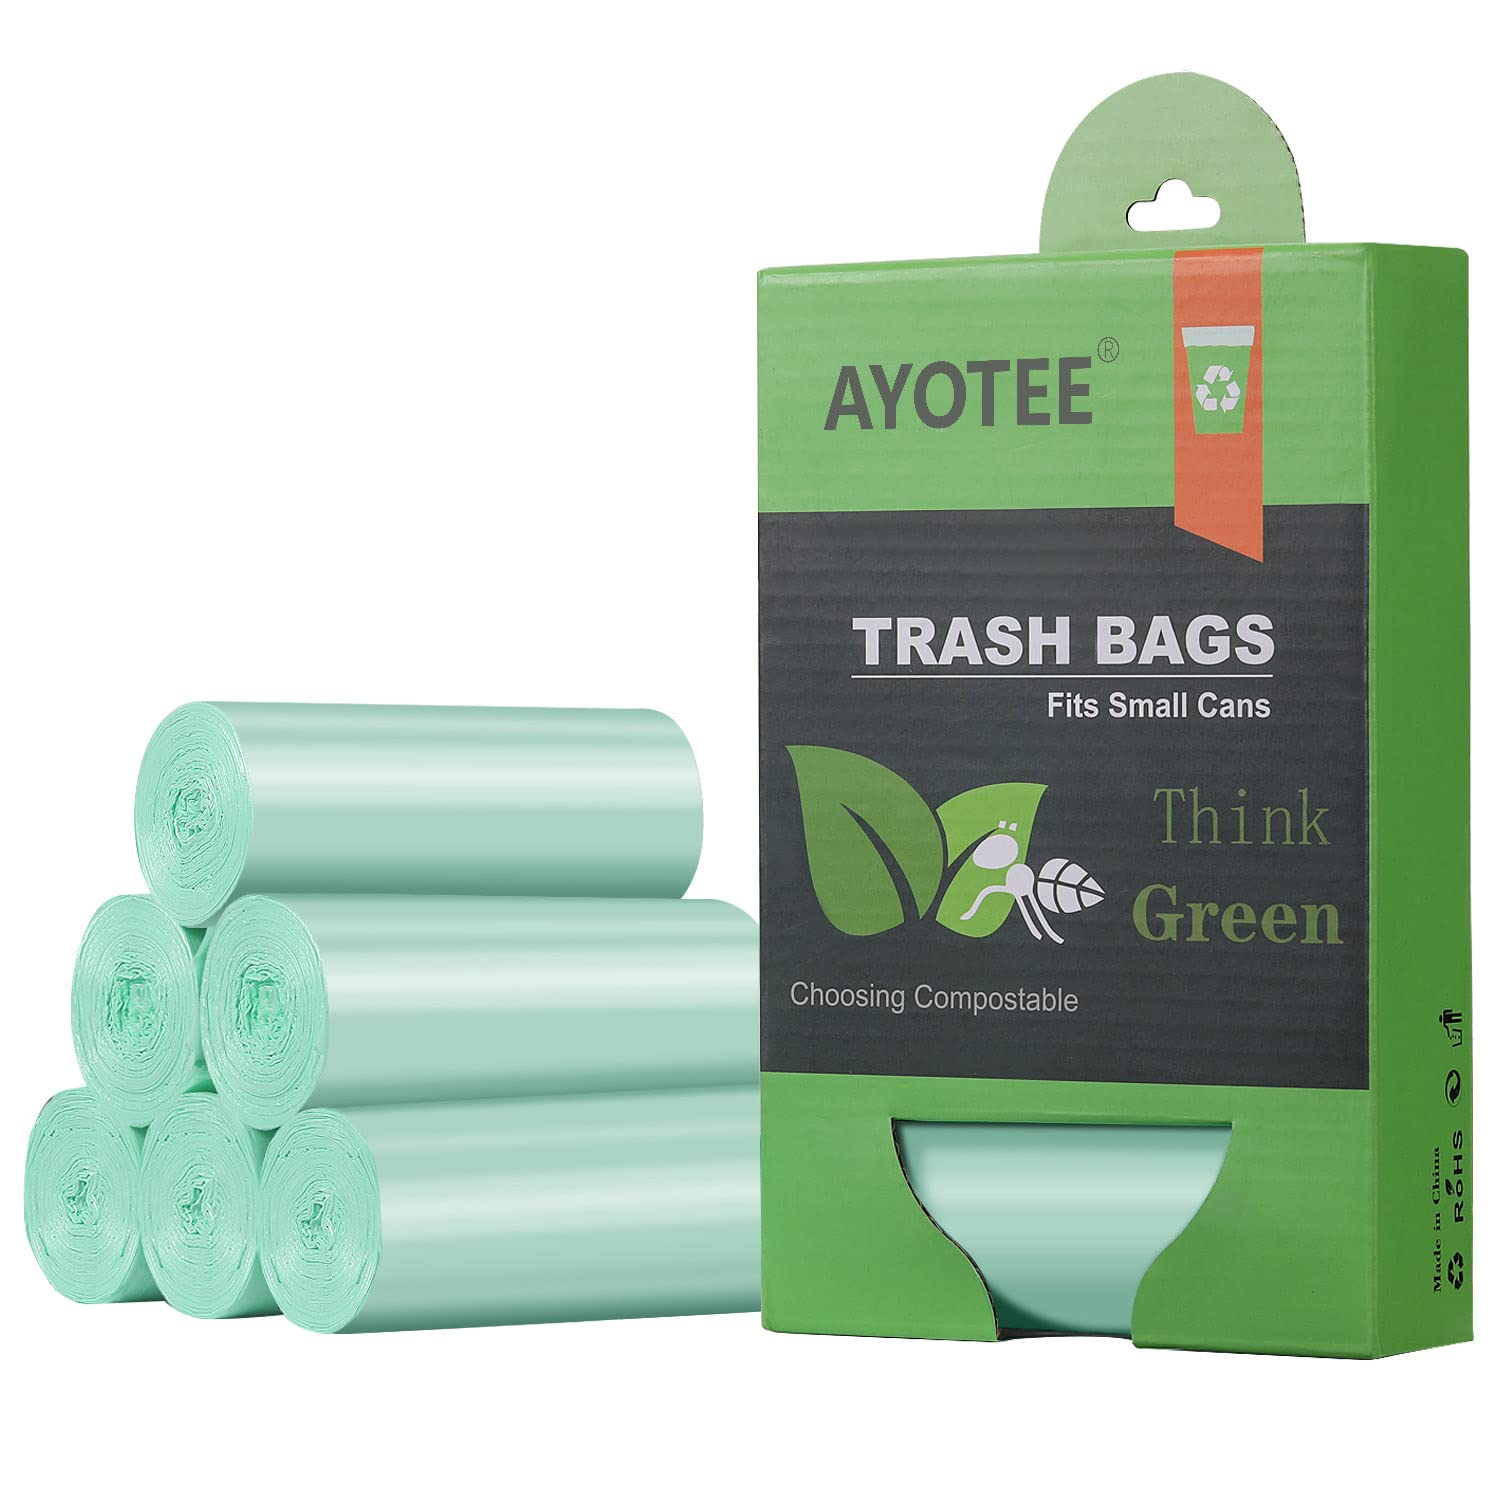 Kitchen Trash Bags 15-17 Gallon 40 Count, AYOTEE Garbage Bags Tall